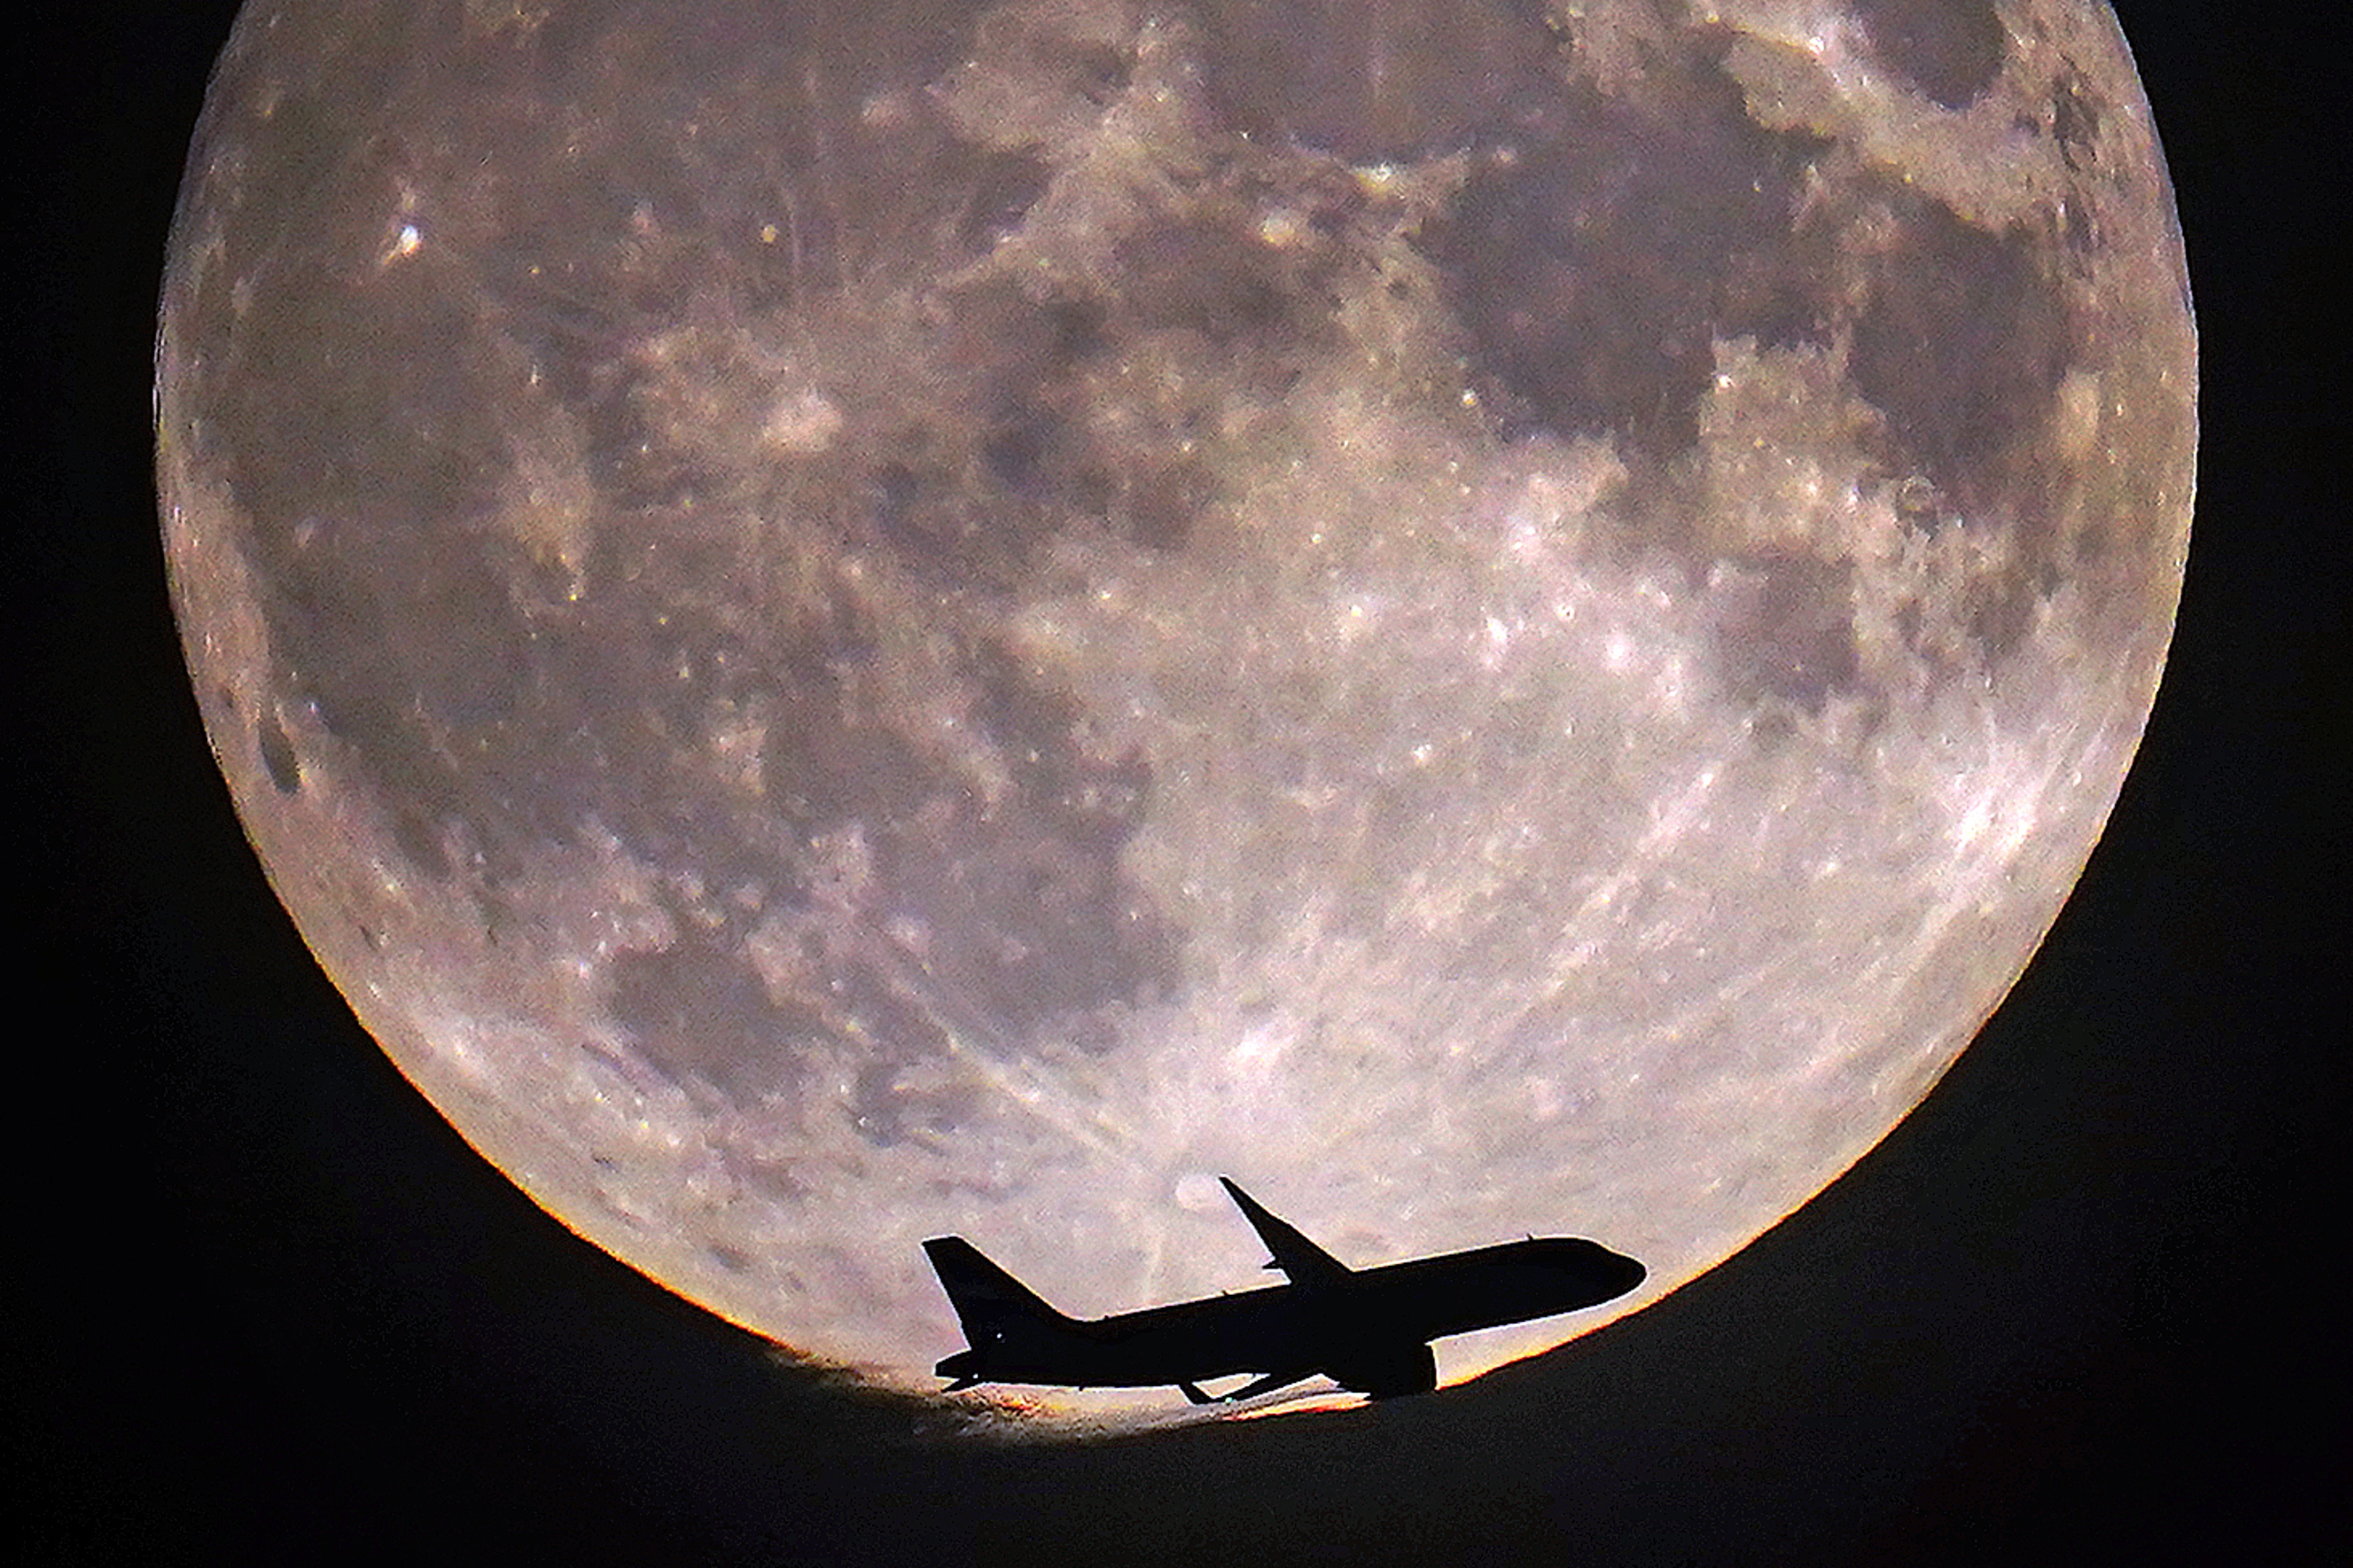 A plane flying in front of the moon